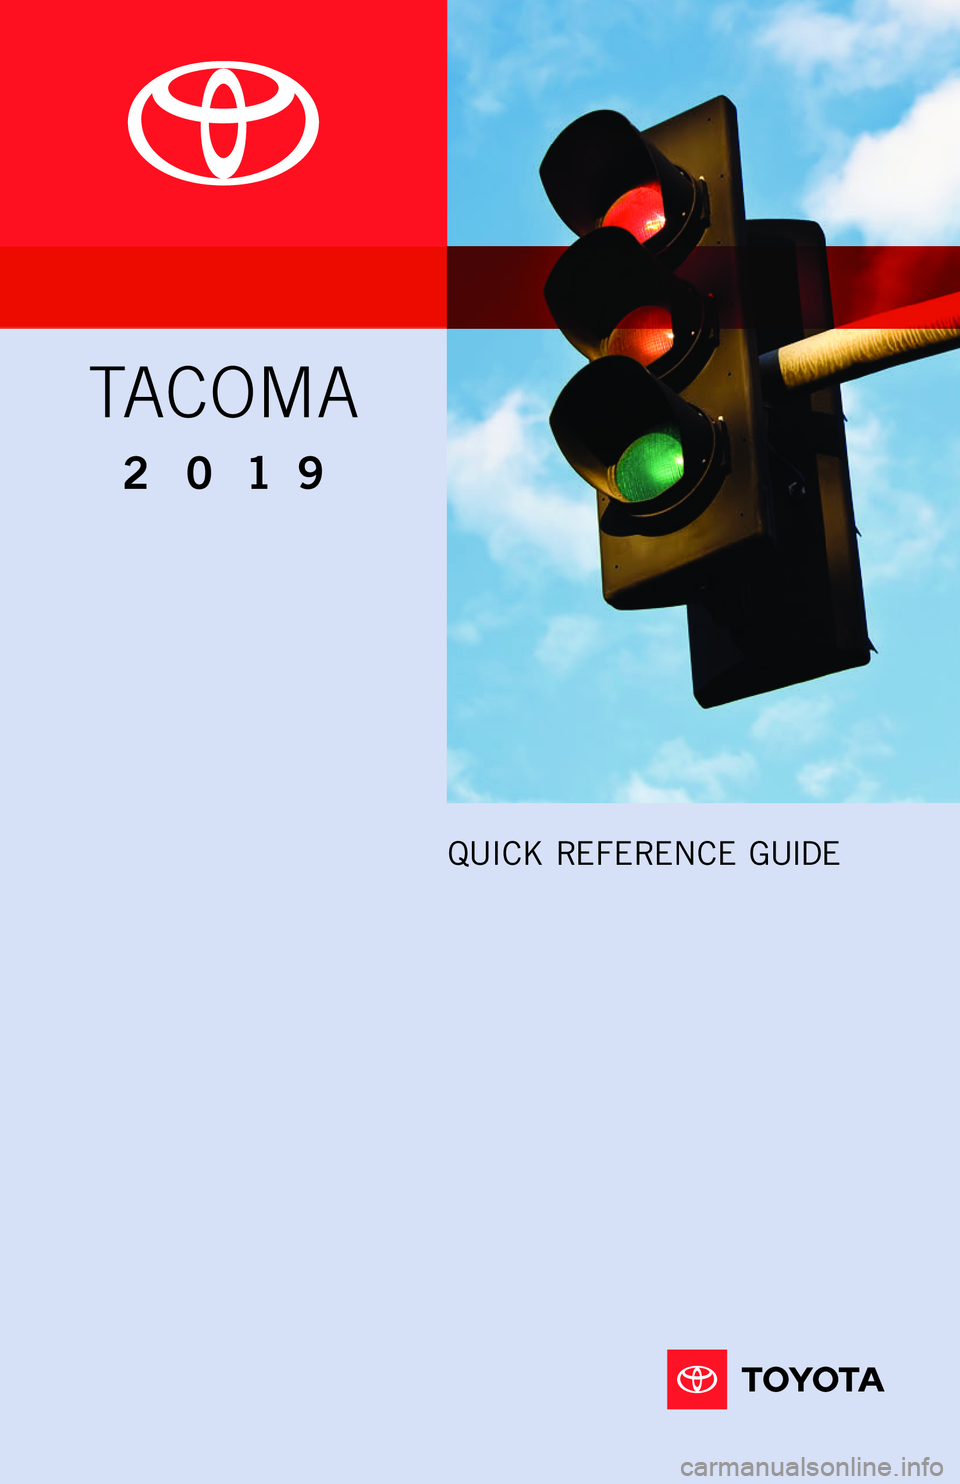 TOYOTA TACOMA 2019  Owners Manual (in English) QUICK REFERENCE  GUIDE
2 0 1 9 
TA C O M A
 18-MKG-12089_QRG_Cover_TACOMA_tg 2.indd  38/13/18  4:37 PM 